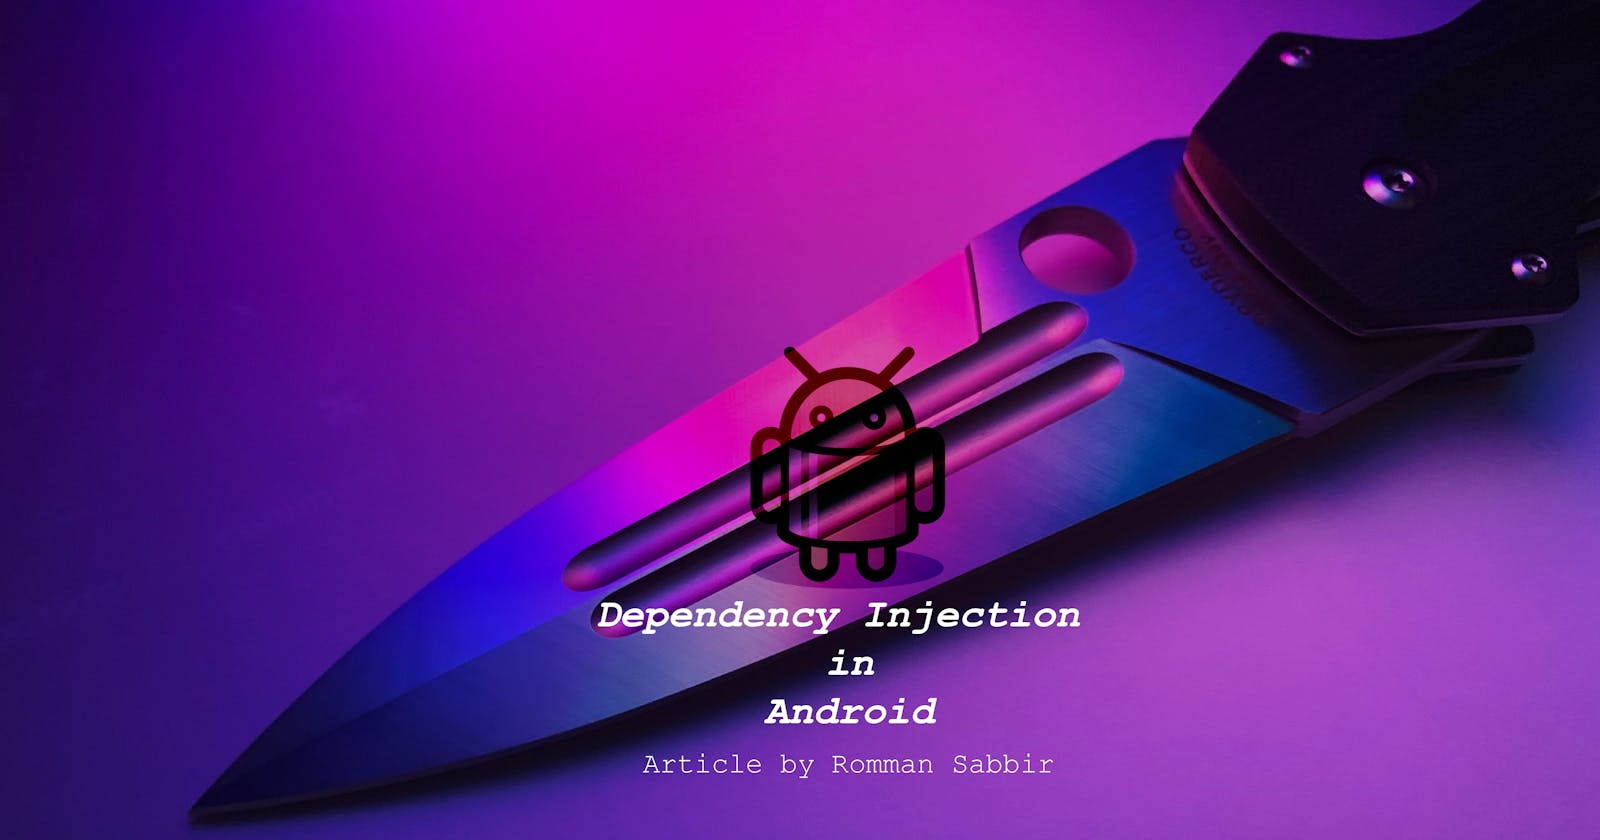 Dependency Injection (Android): What/Why DI? [PART 1]